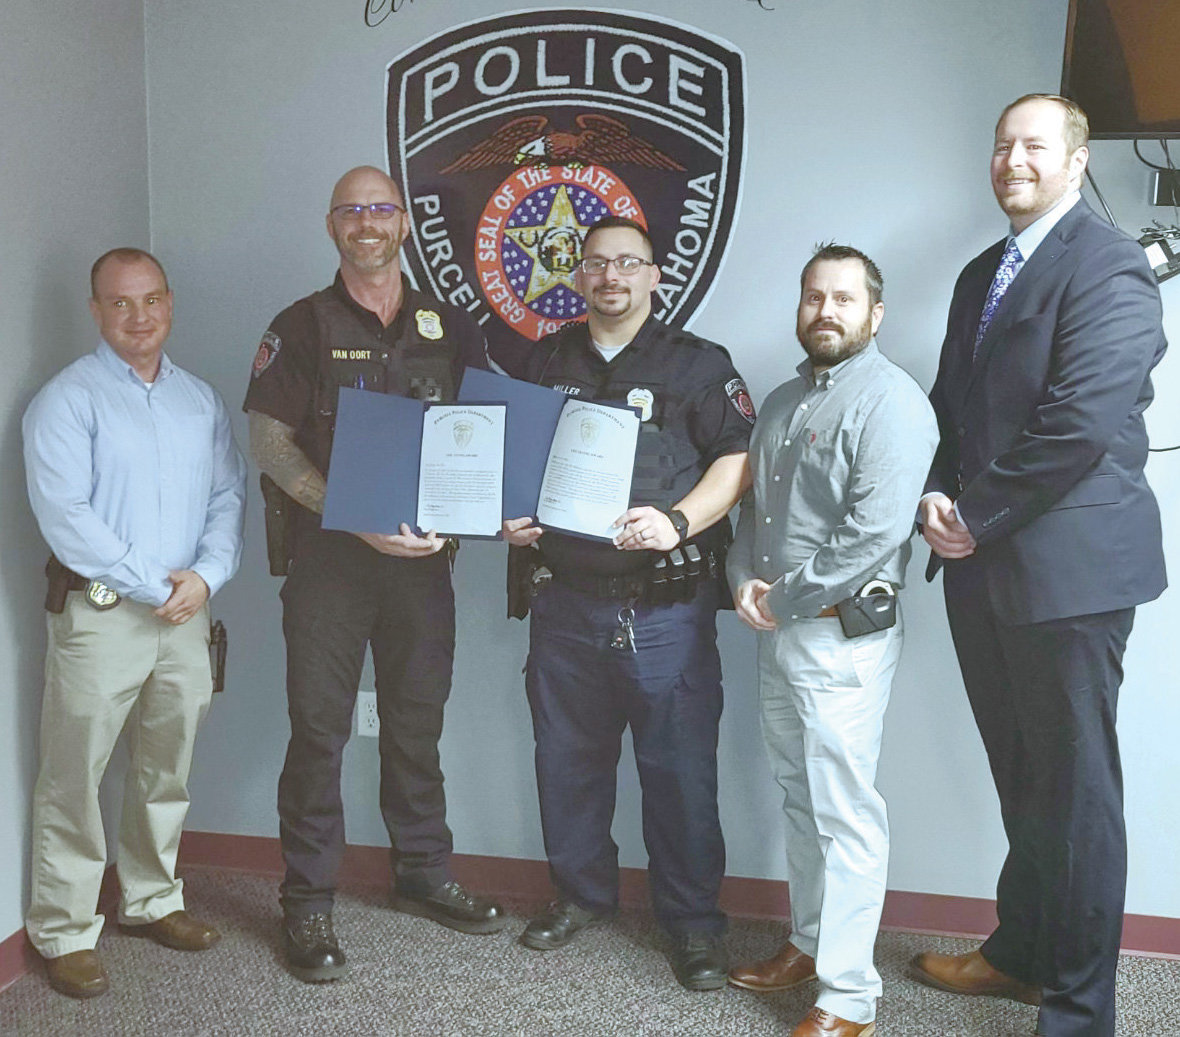 Purcell Police Sgt. Josh Van Oort and Officer Joshua Miller, second and third from the left, were honored by Chief Bobby Elmore, Assistant Chief James Bolling and Captain Jeff Hixon.